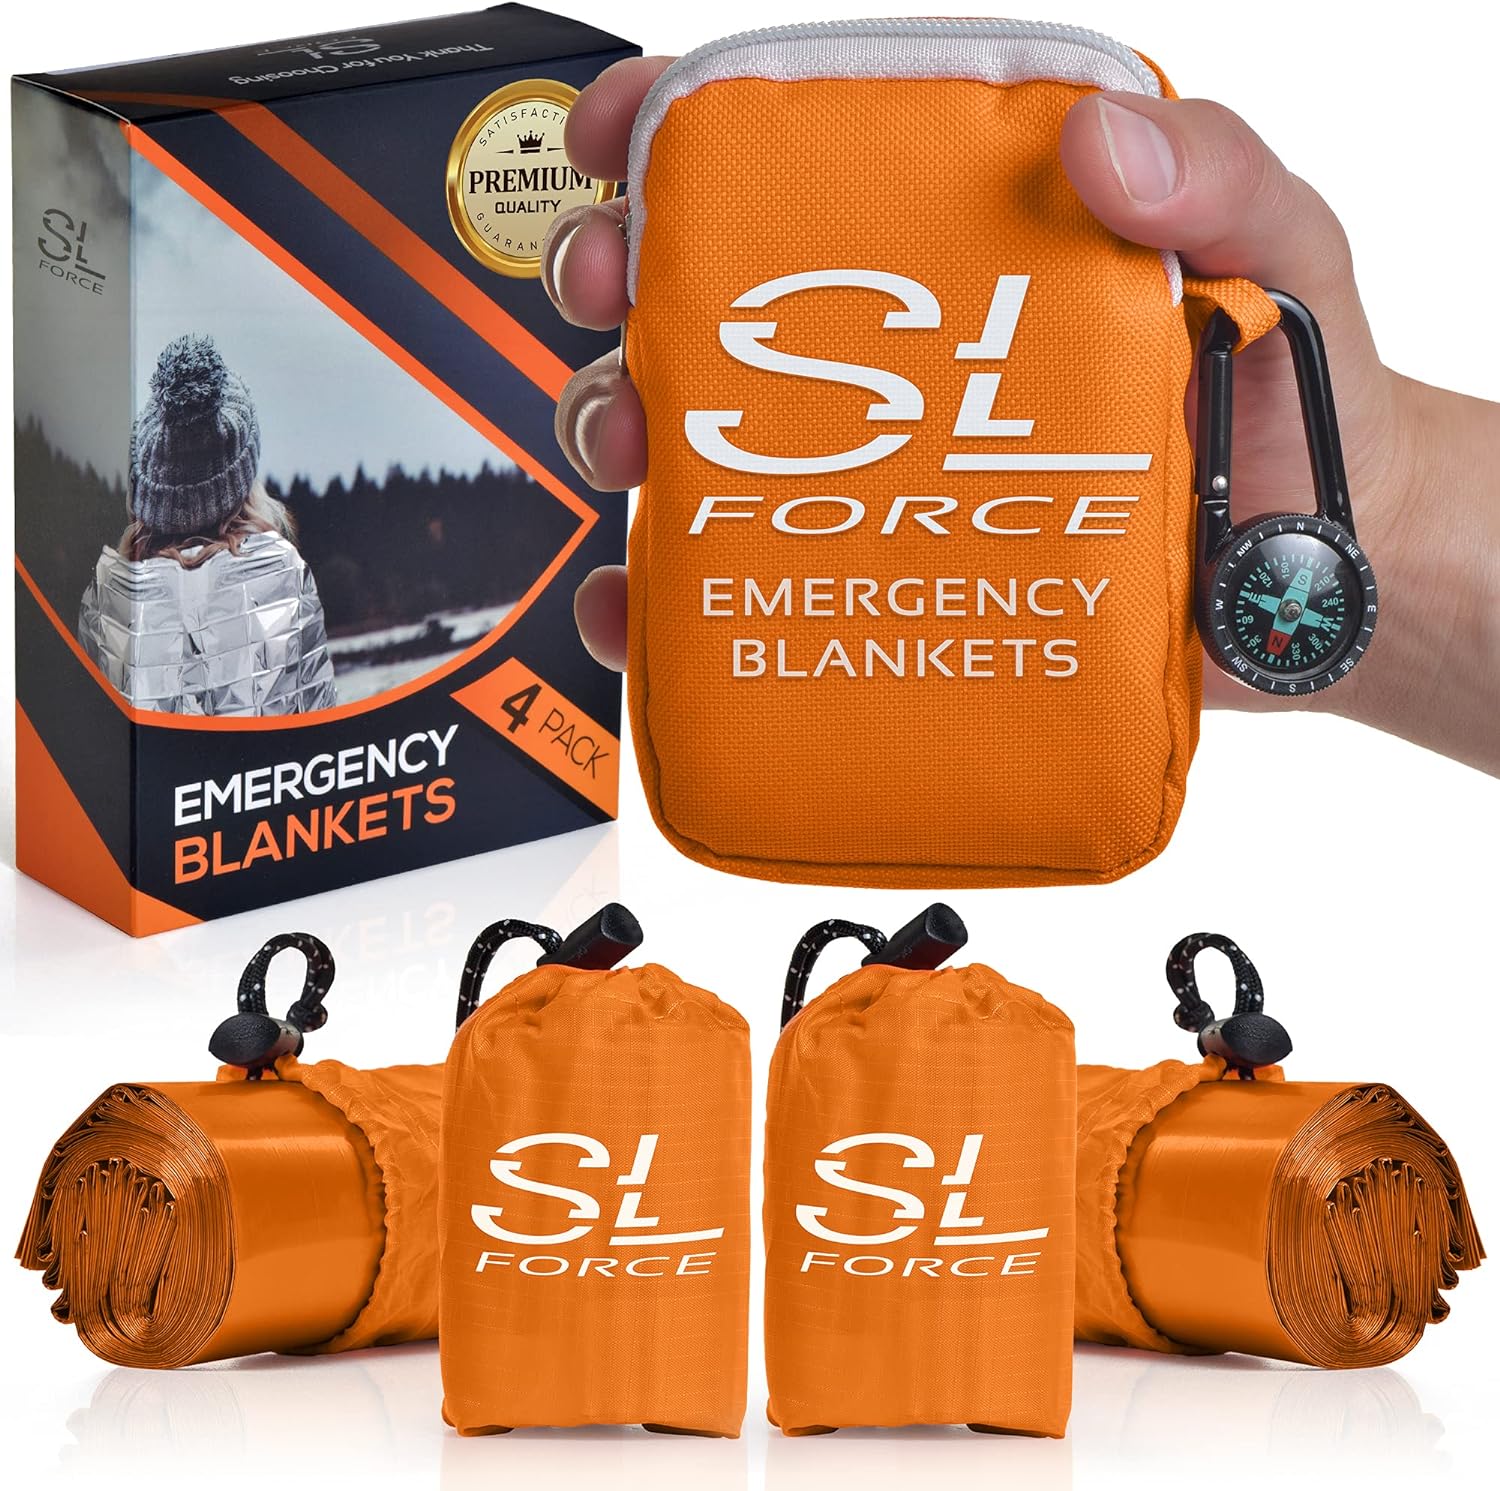 SLFORCE Emergency Blankets for Survival, 4 Pack of Gigantic Space Blanket. Comes with Four Extra-Large Mylar Blankets, Compass, and Zipper Bag. The Best Thermal Space Blankets (4, Orange, Extra Large)